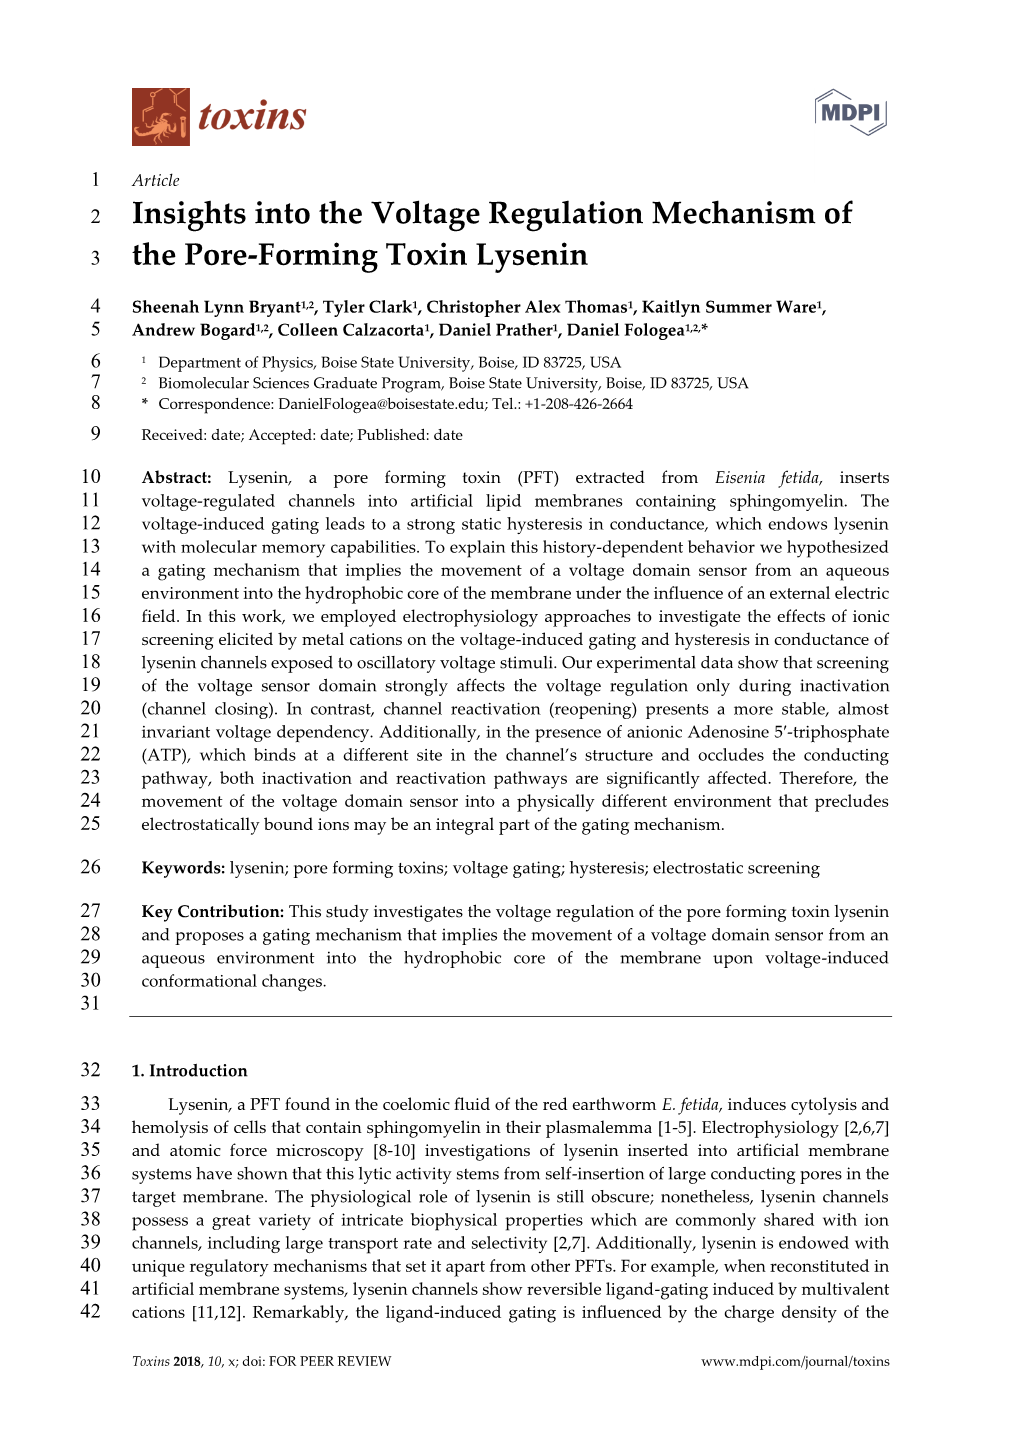 The Pore-Forming Toxin Lysenin